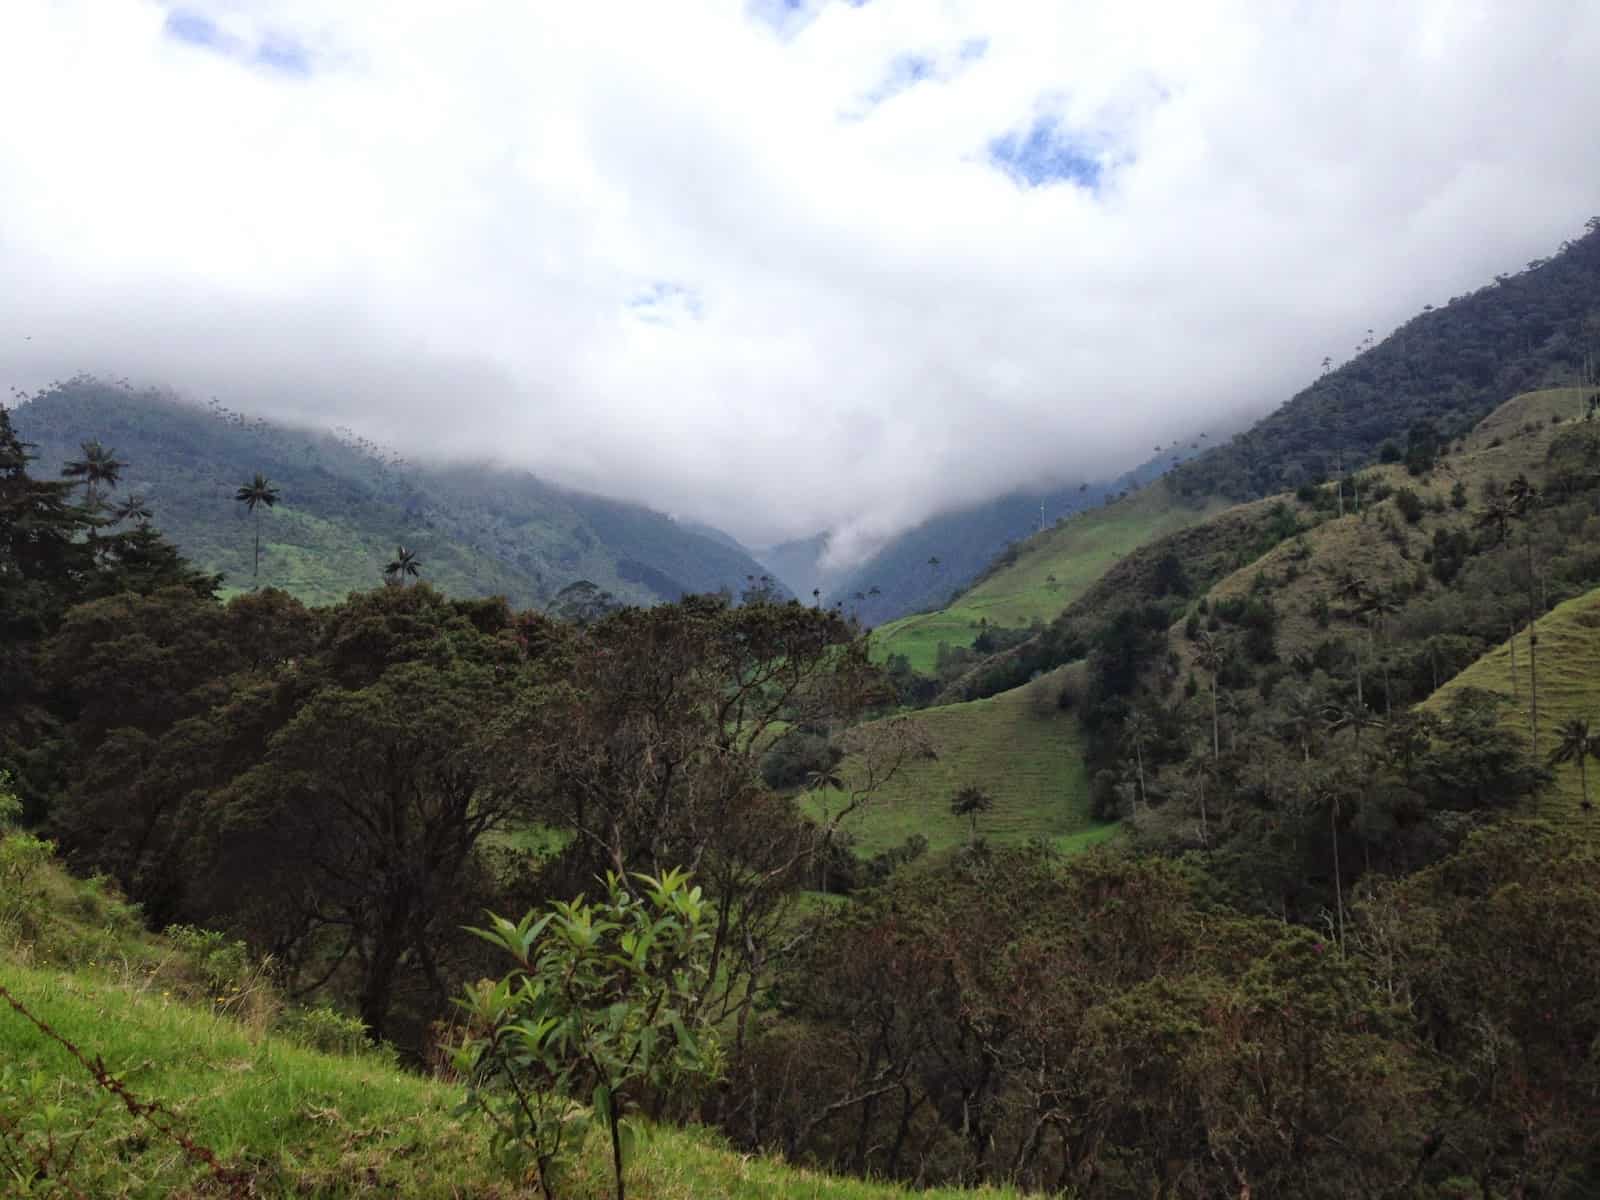 Scenery on the road to Cocora Valley, Quindío, Colombia